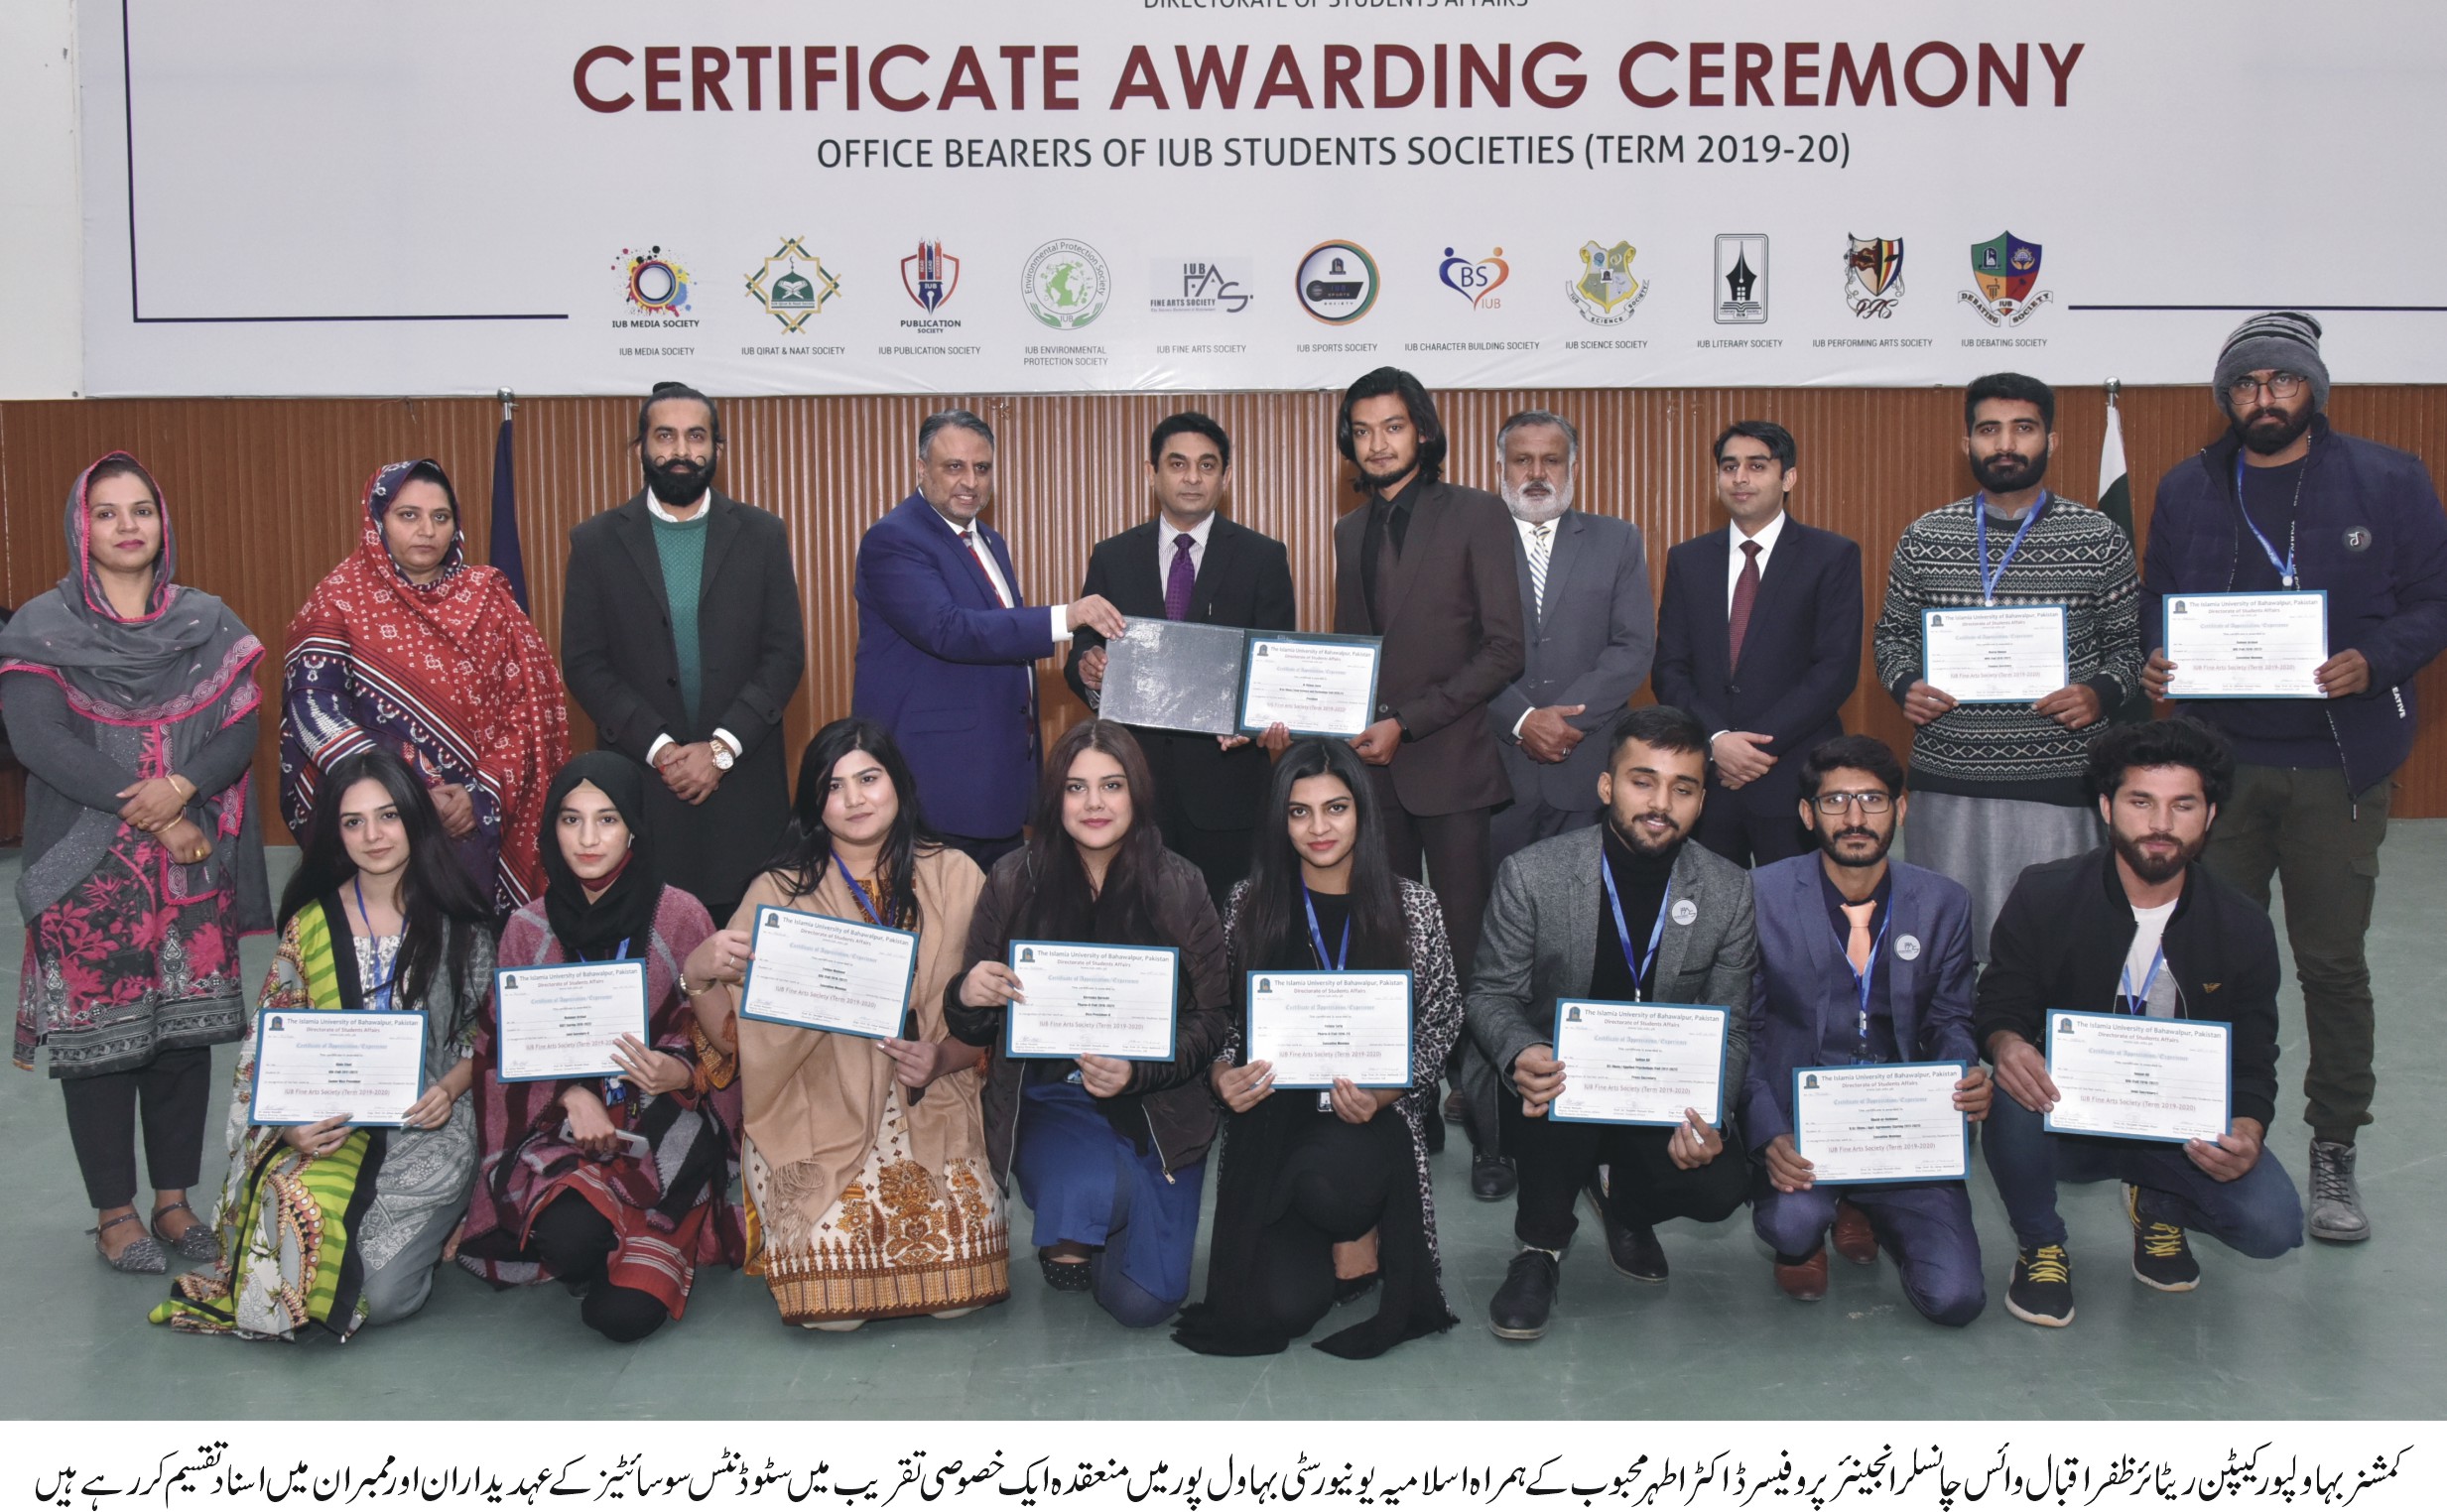 Student Socities Certifcate Awarding Ceremony 2